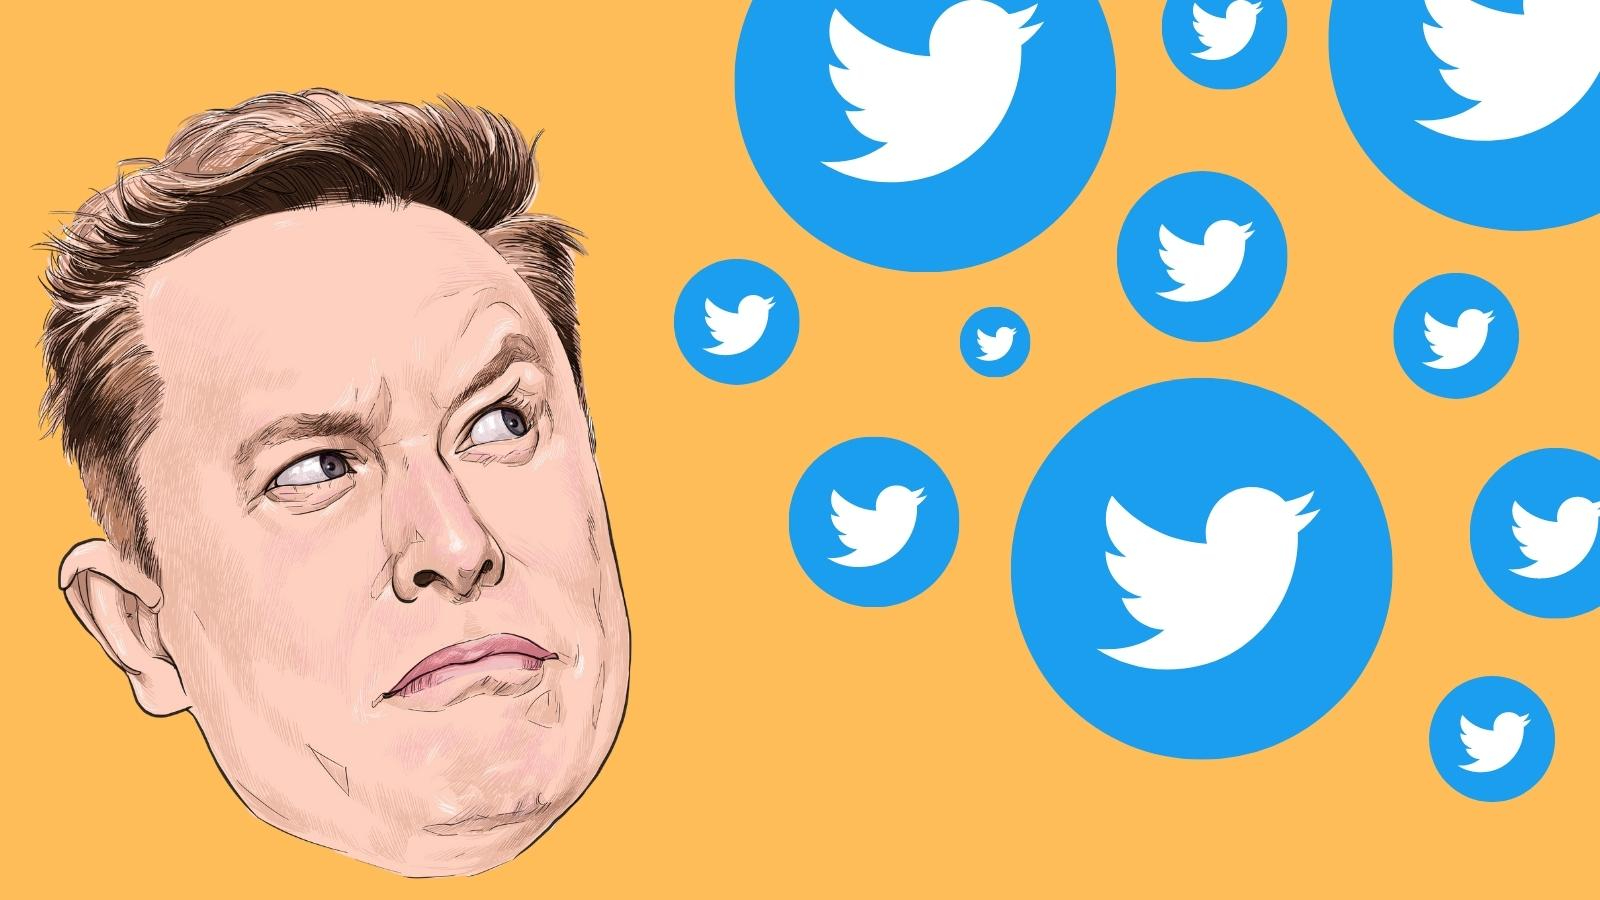 Live weblog: Twitter chaos - Elon Musk might reinstate almost all suspended accounts